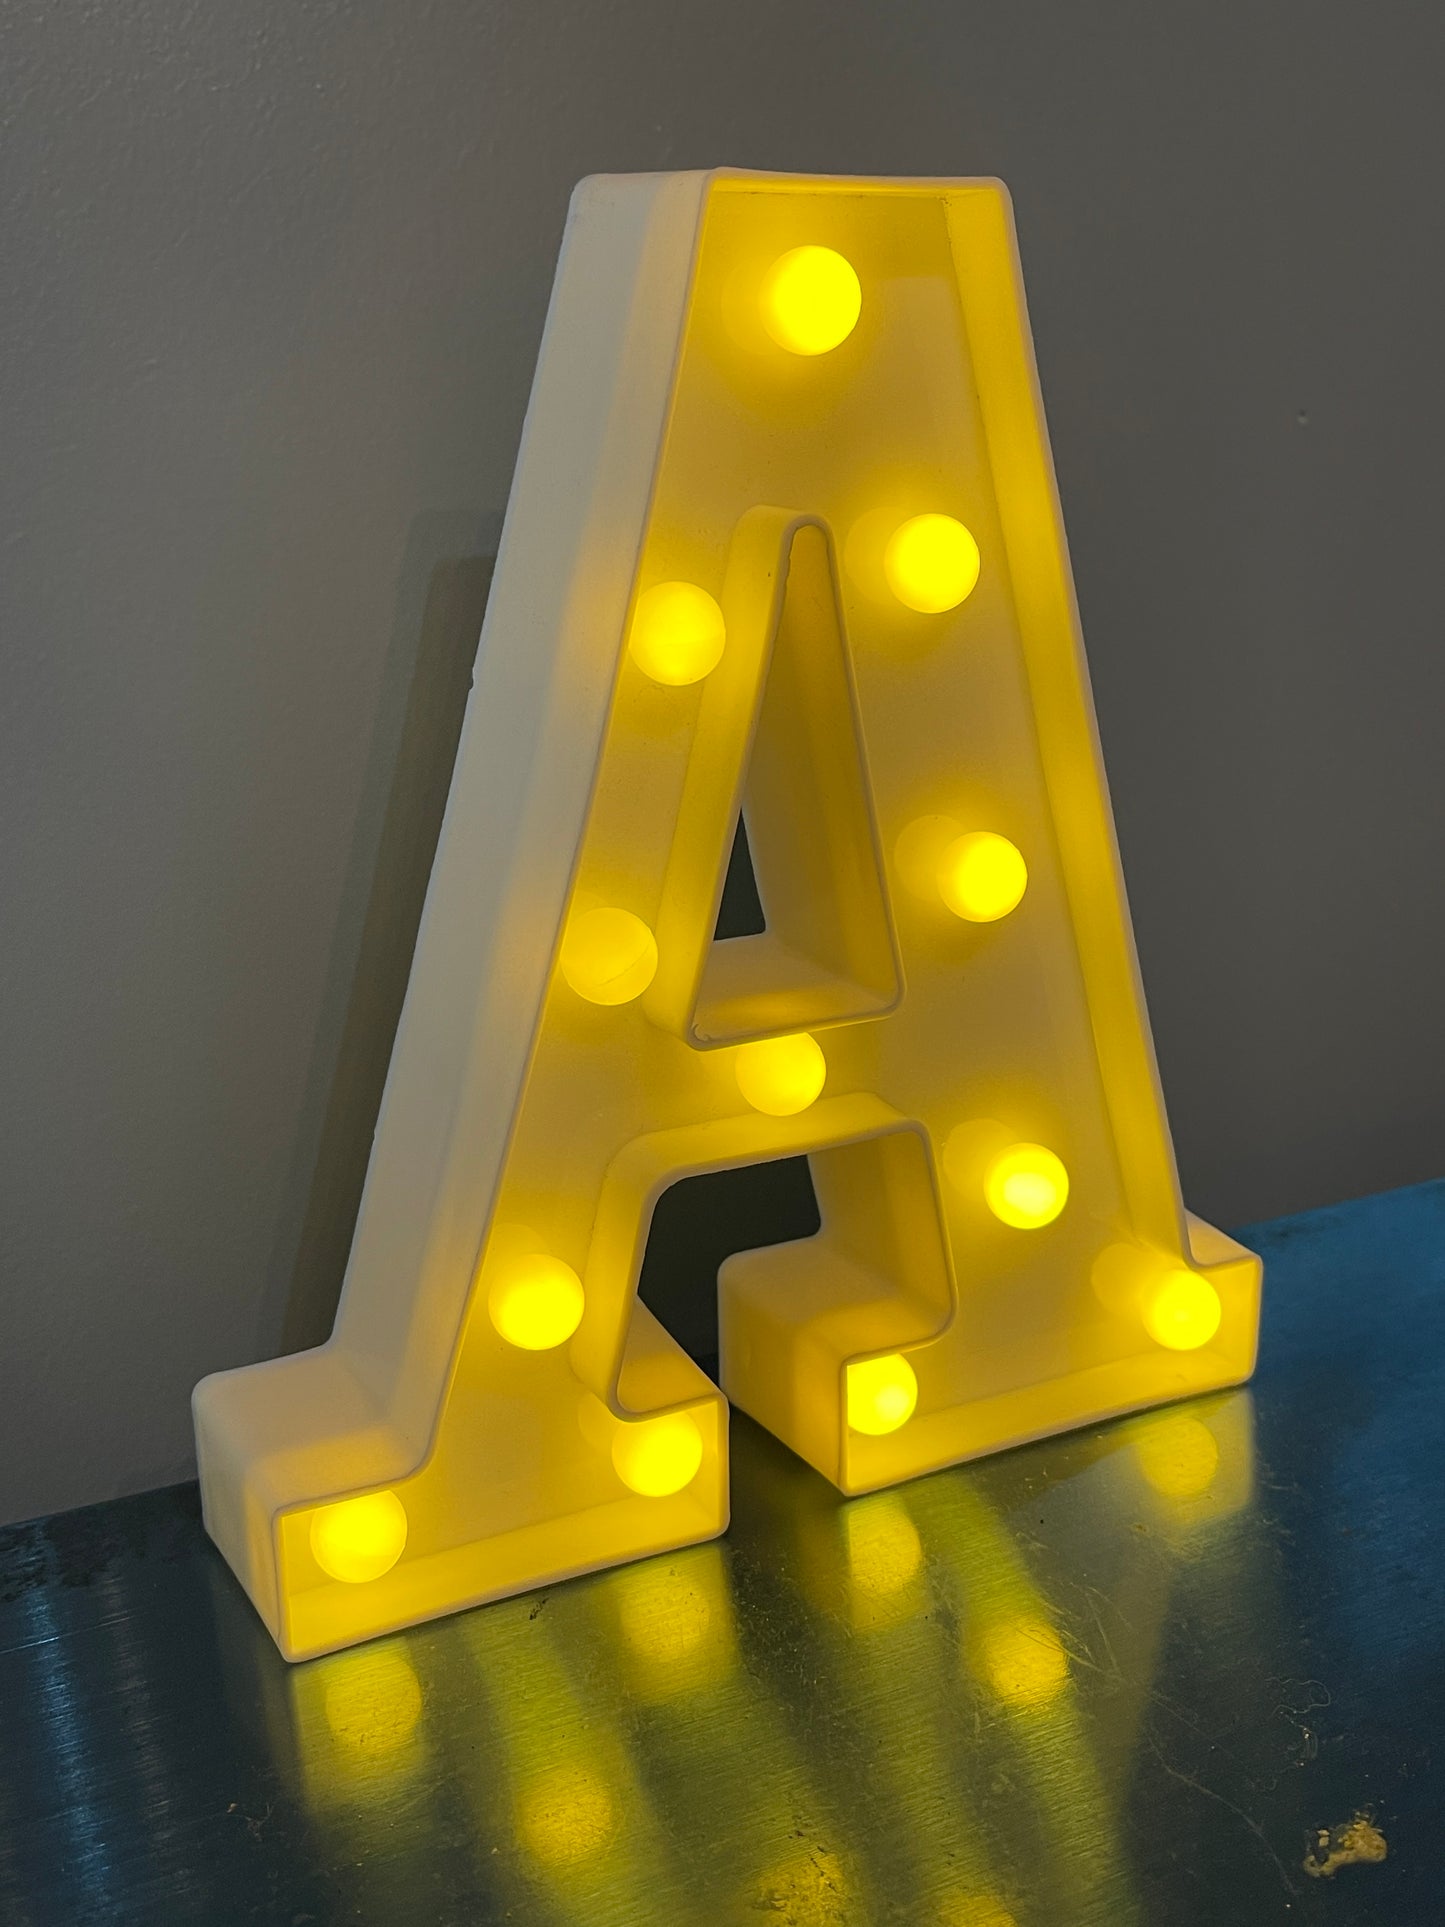 Copy of White Letter “A” lighted